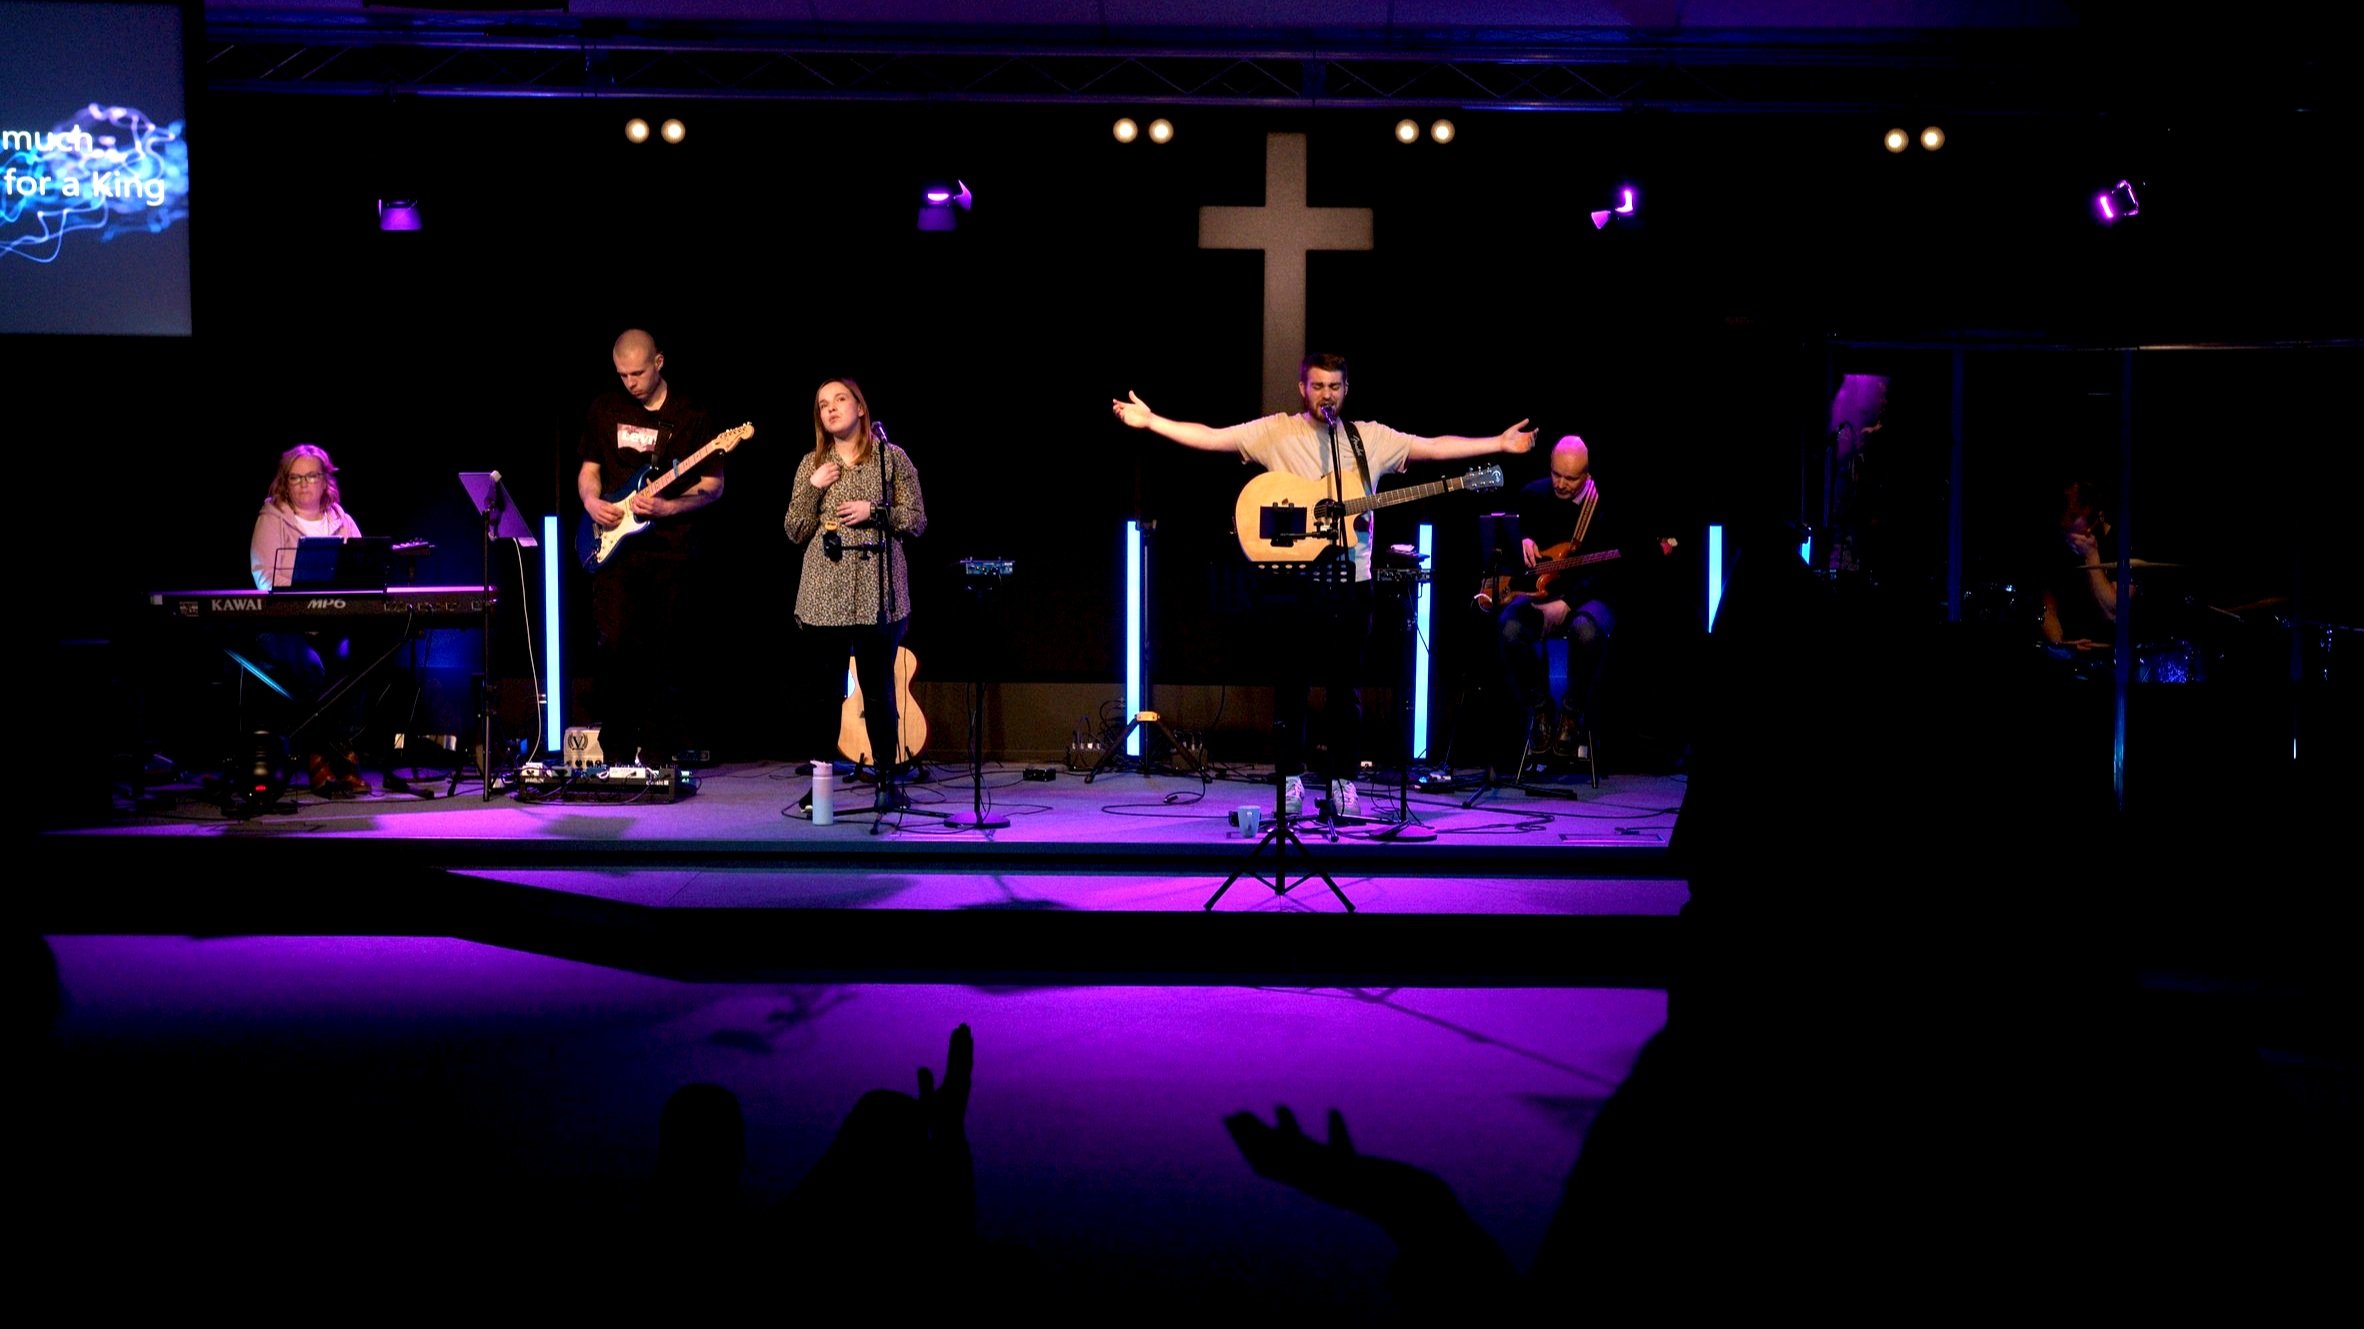   Worship Space   Every month at Riverside   watch  